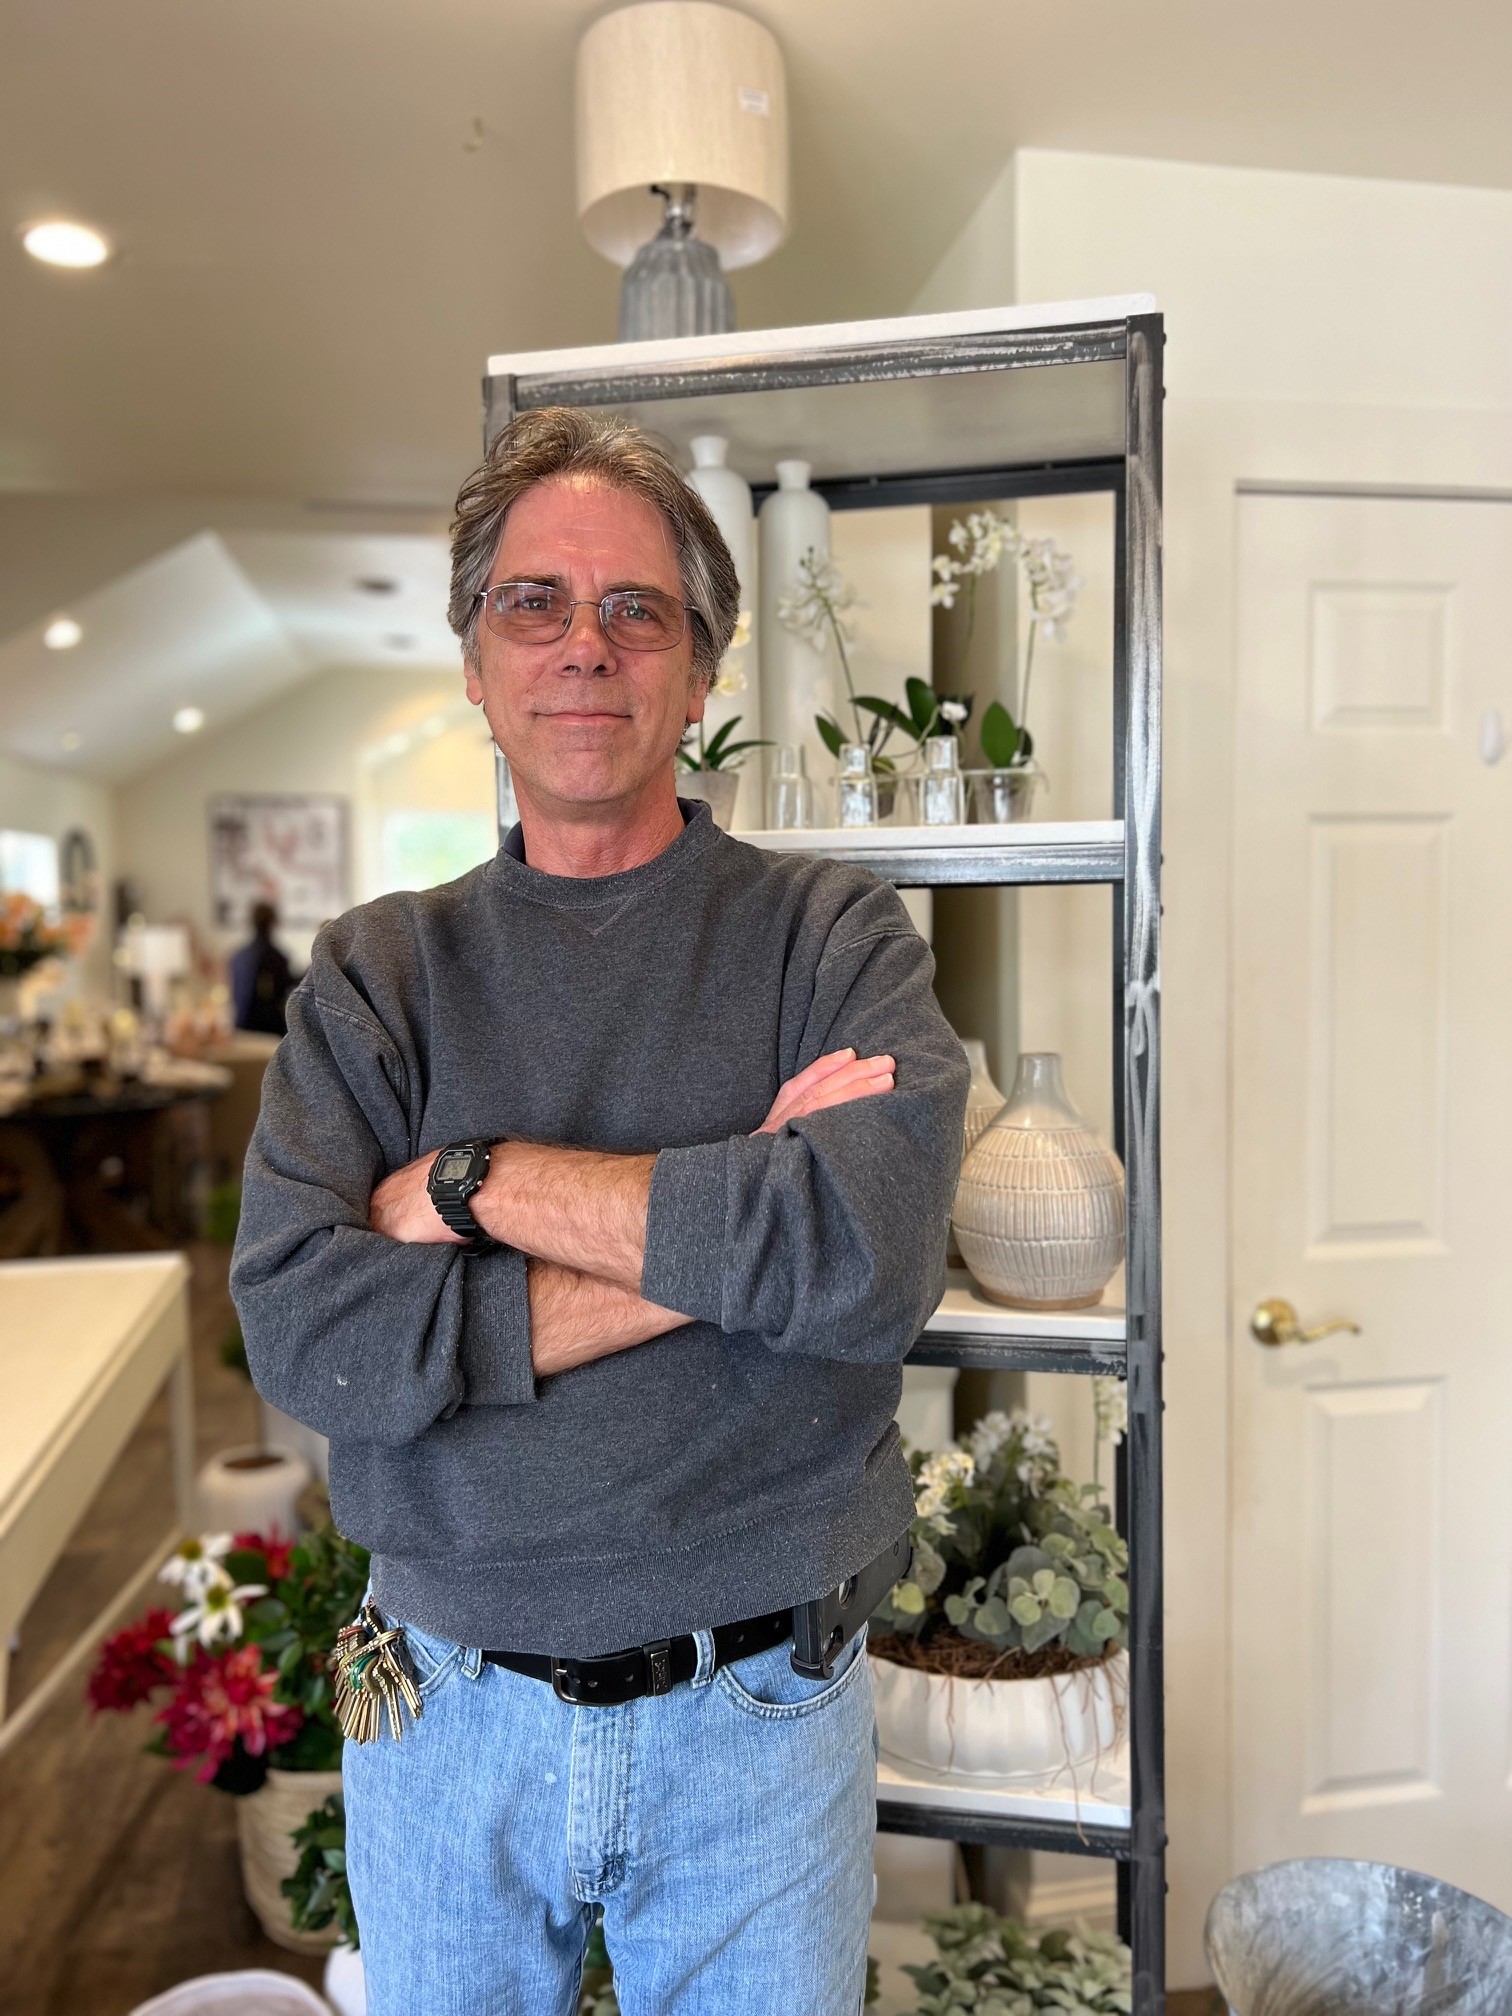 A man with gray hair and glasses stands confidently with arms crossed in a cozy indoor setting. He wears a gray sweatshirt and blue jeans, and is surrounded by potted plants and home decor items on shelves in the background. Fearrington Village